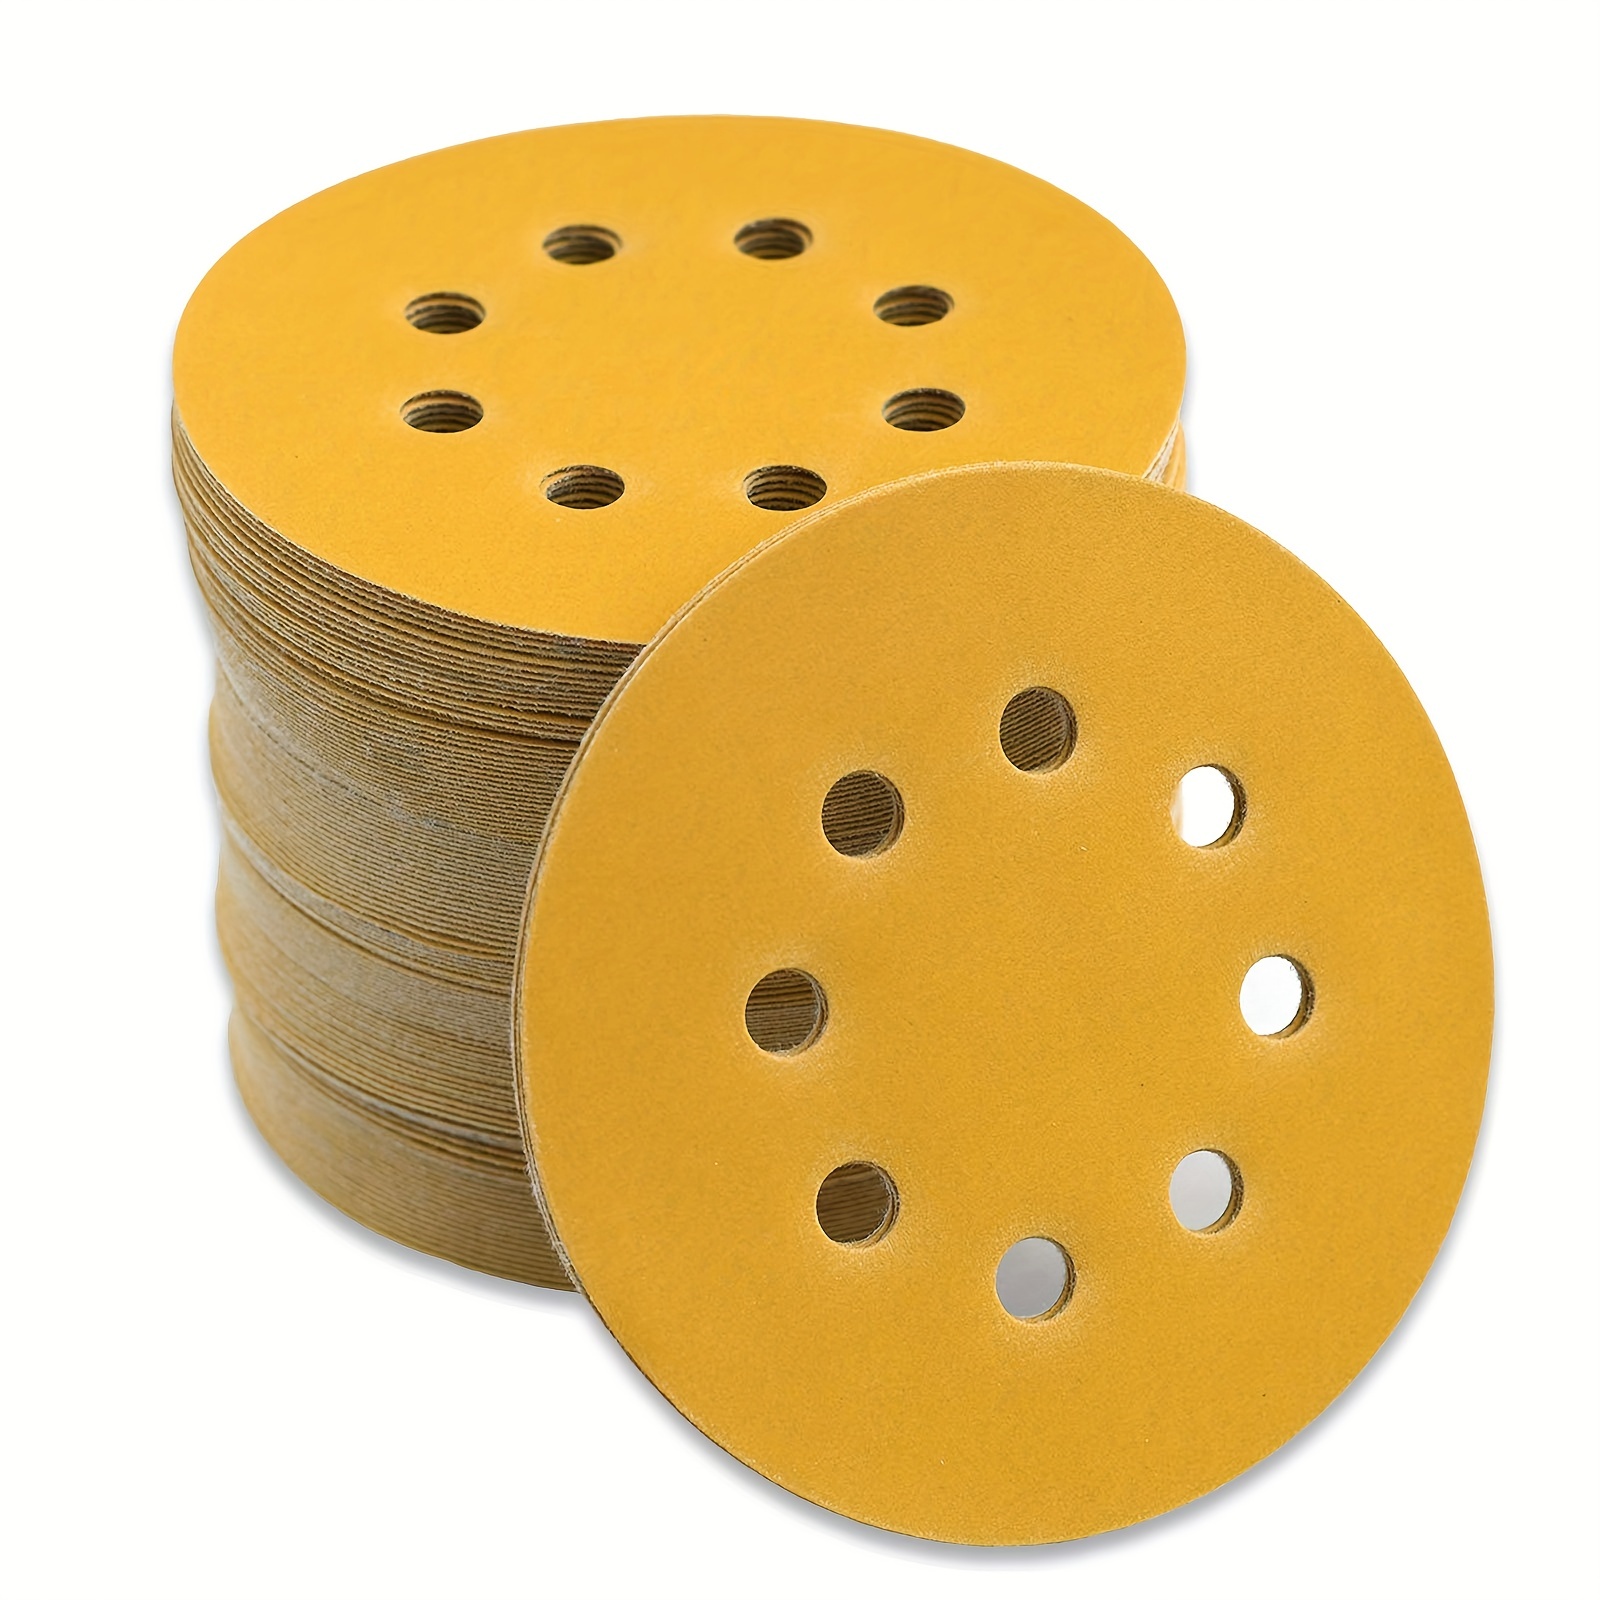 

100pcs 5-inch 8-hole Yellow Sand Air Grinder Sandpaper Sheet: Perfect For Sanding Wood & Metal, Dry & Wet Dual Purpose!